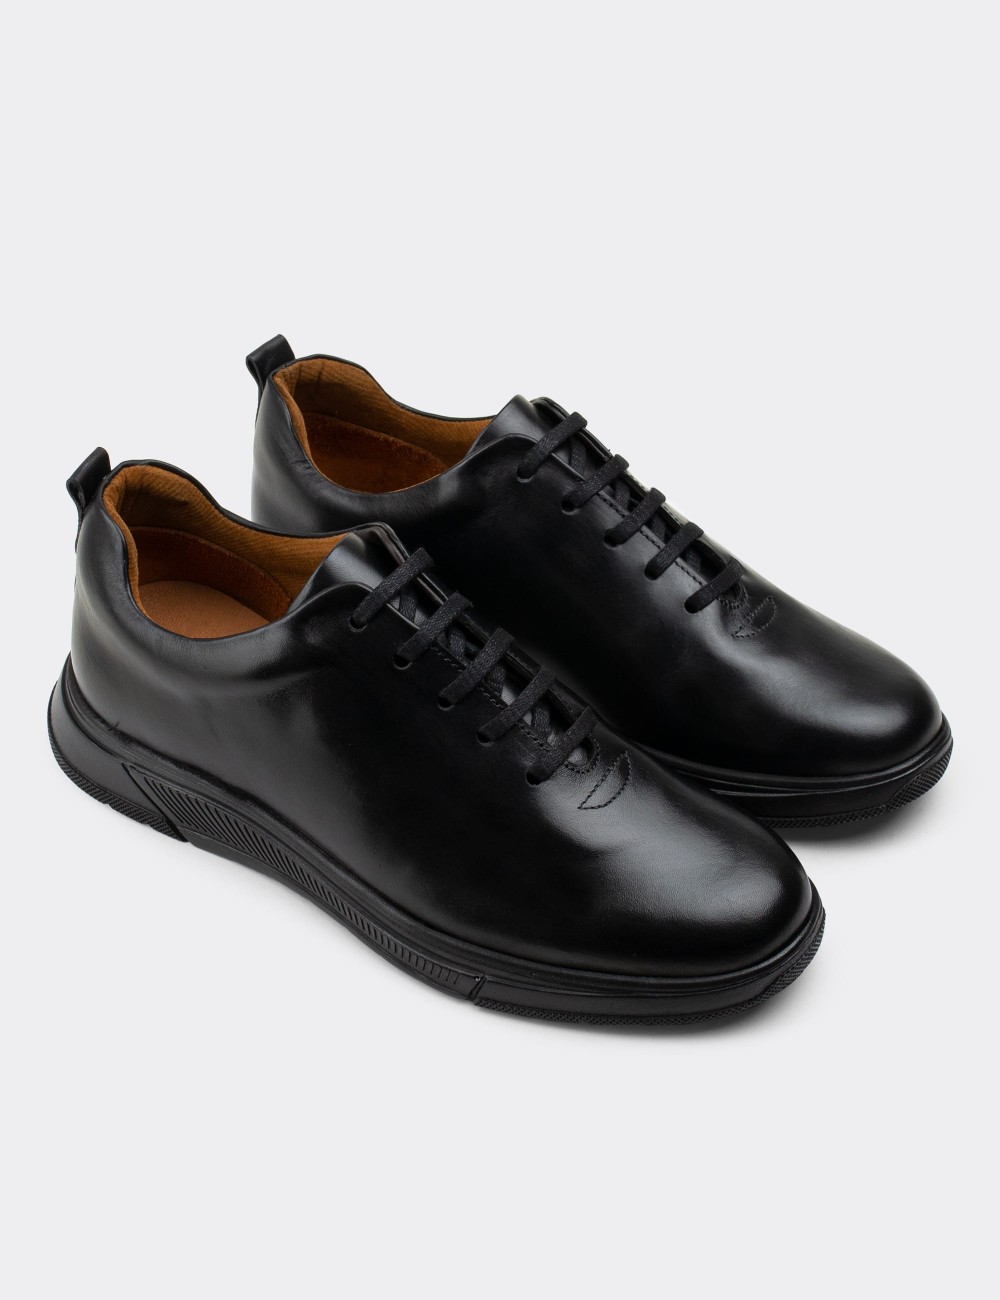 Black  Leather Lace-up Shoes - 01875MSYHC01